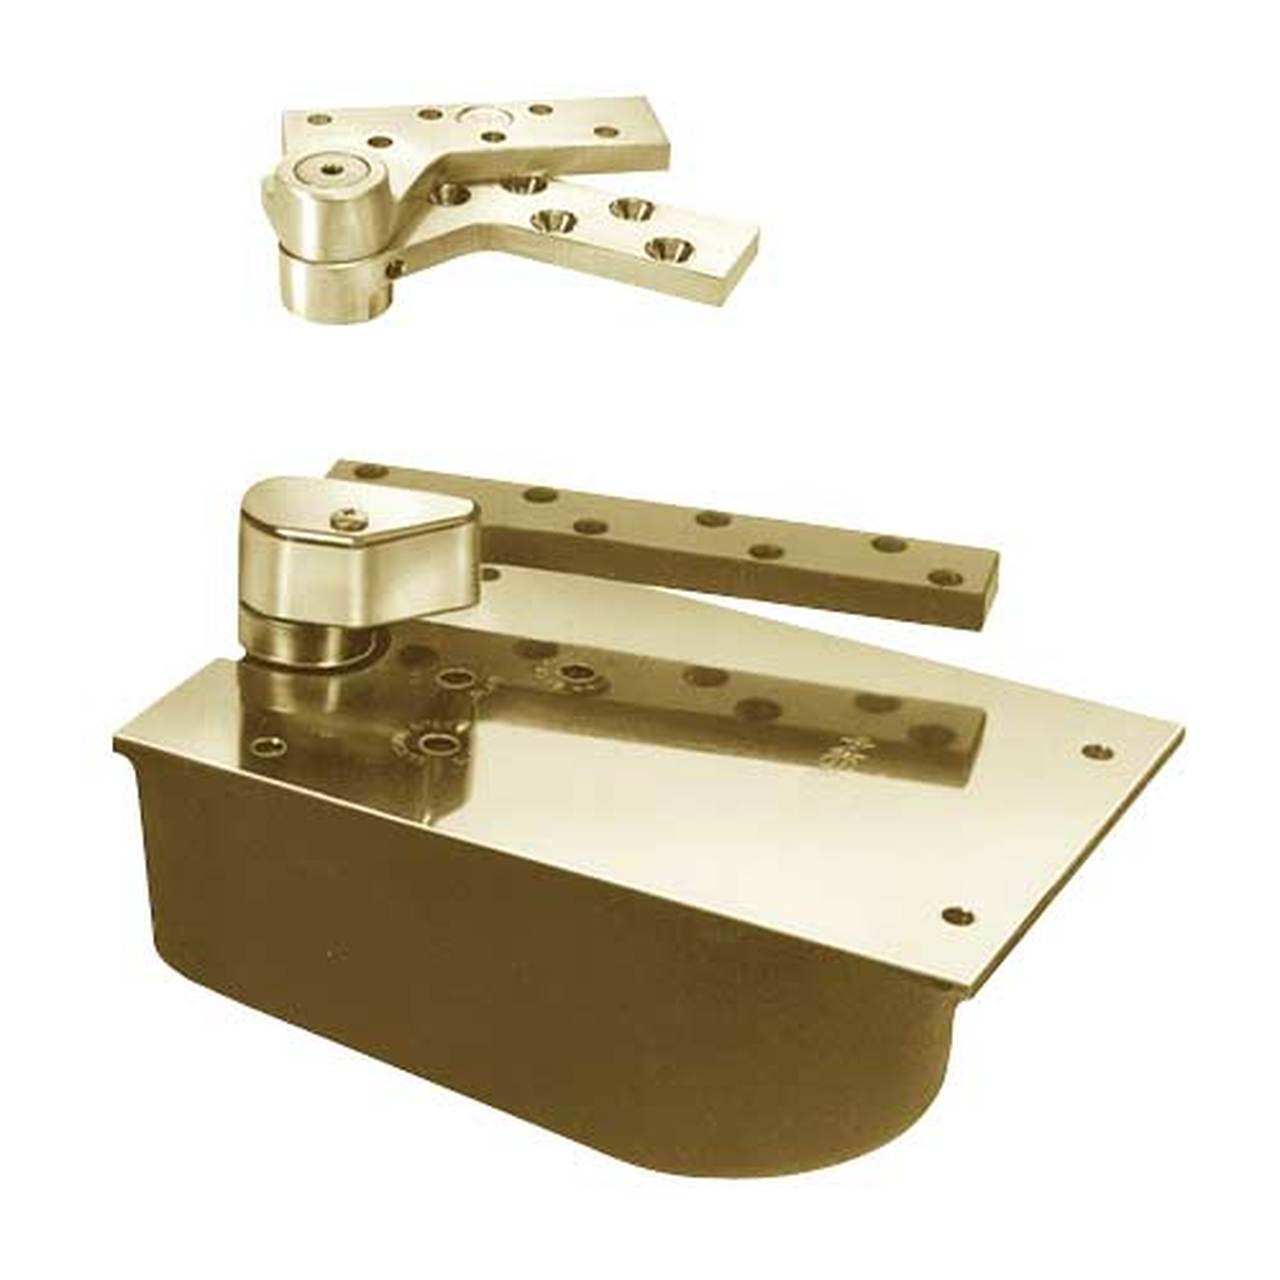 L27-105N-LFP-LCC-RH-2-606 Rixson 27 Series Extra Heavy Duty Lead Lined Offset Floor Closer in Satin Brass Finish